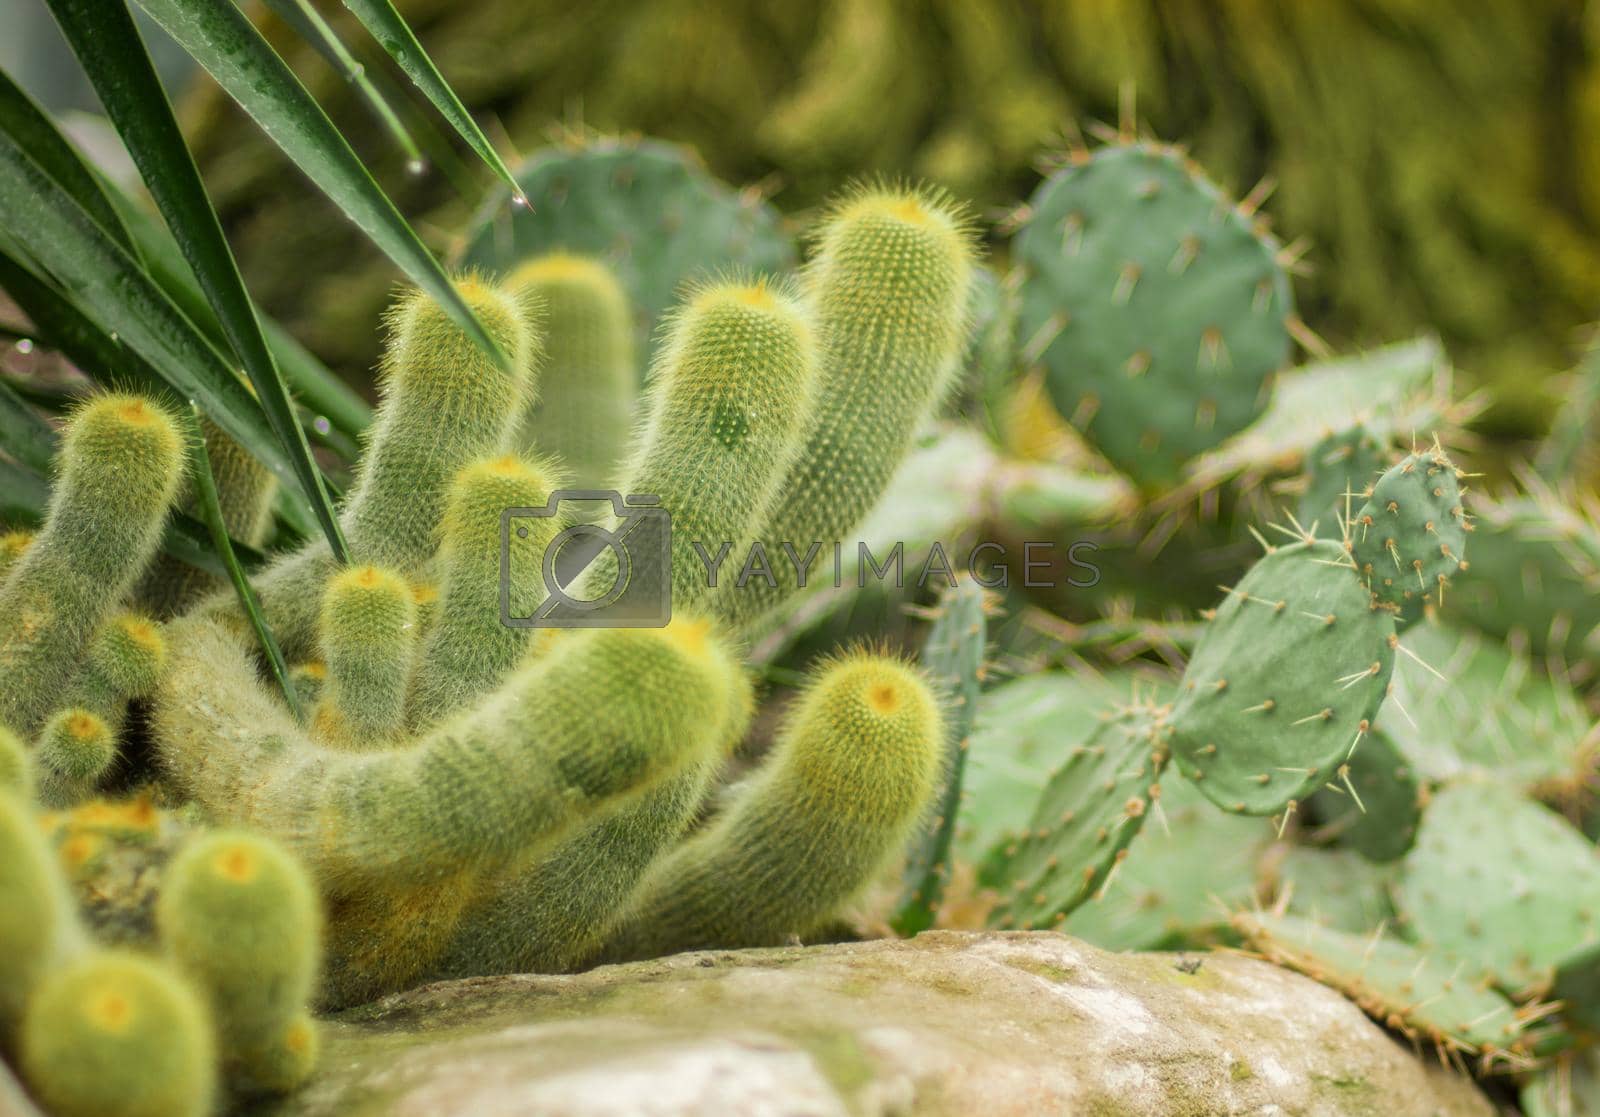 Royalty free image of Many arms of green furry cactus by Godi